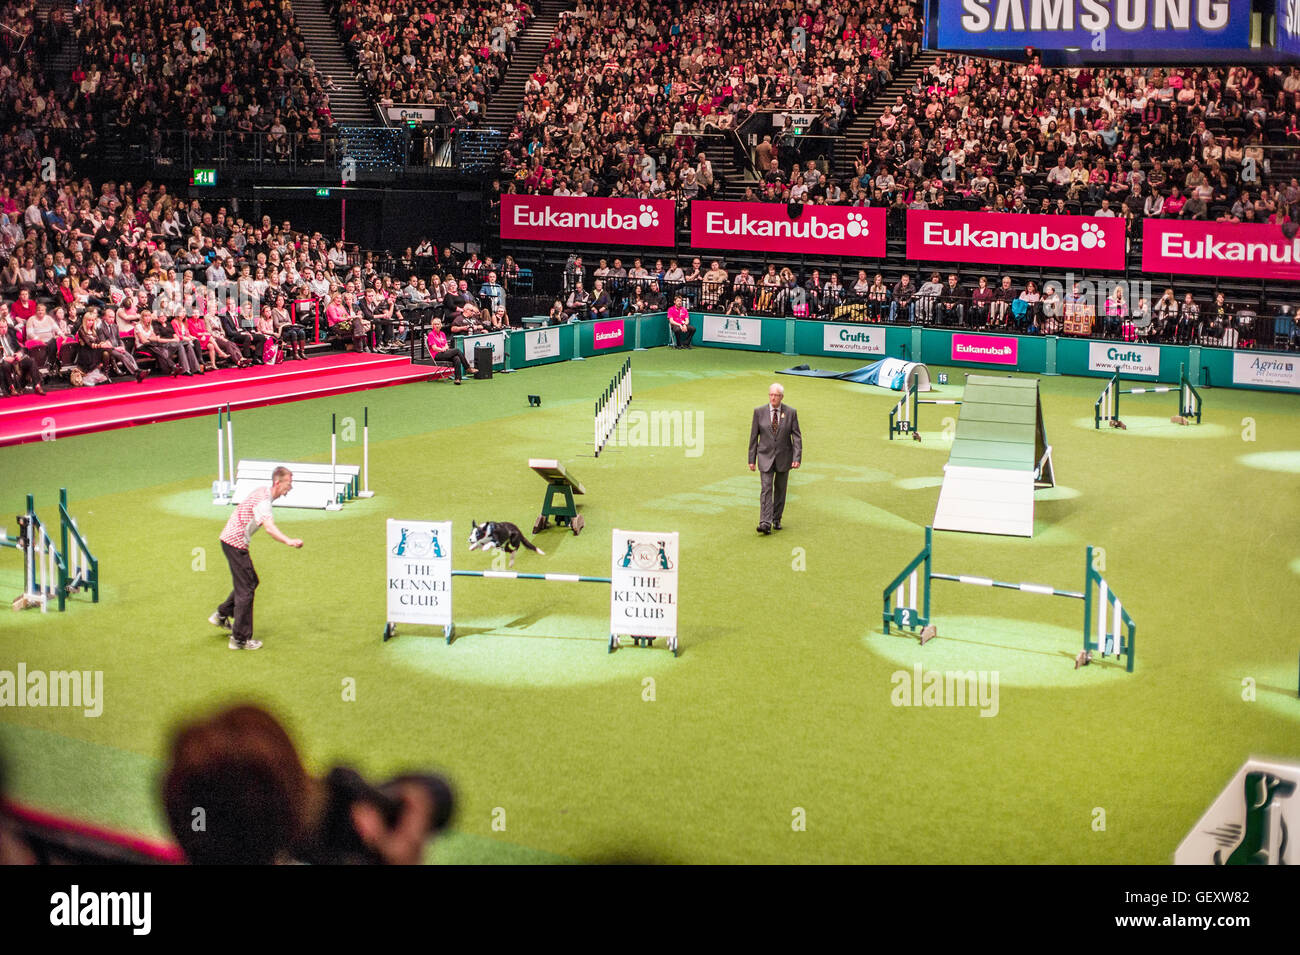 The Crufts Dog Show held every year at the NEC exhibition venue in Birmingham. Stock Photo